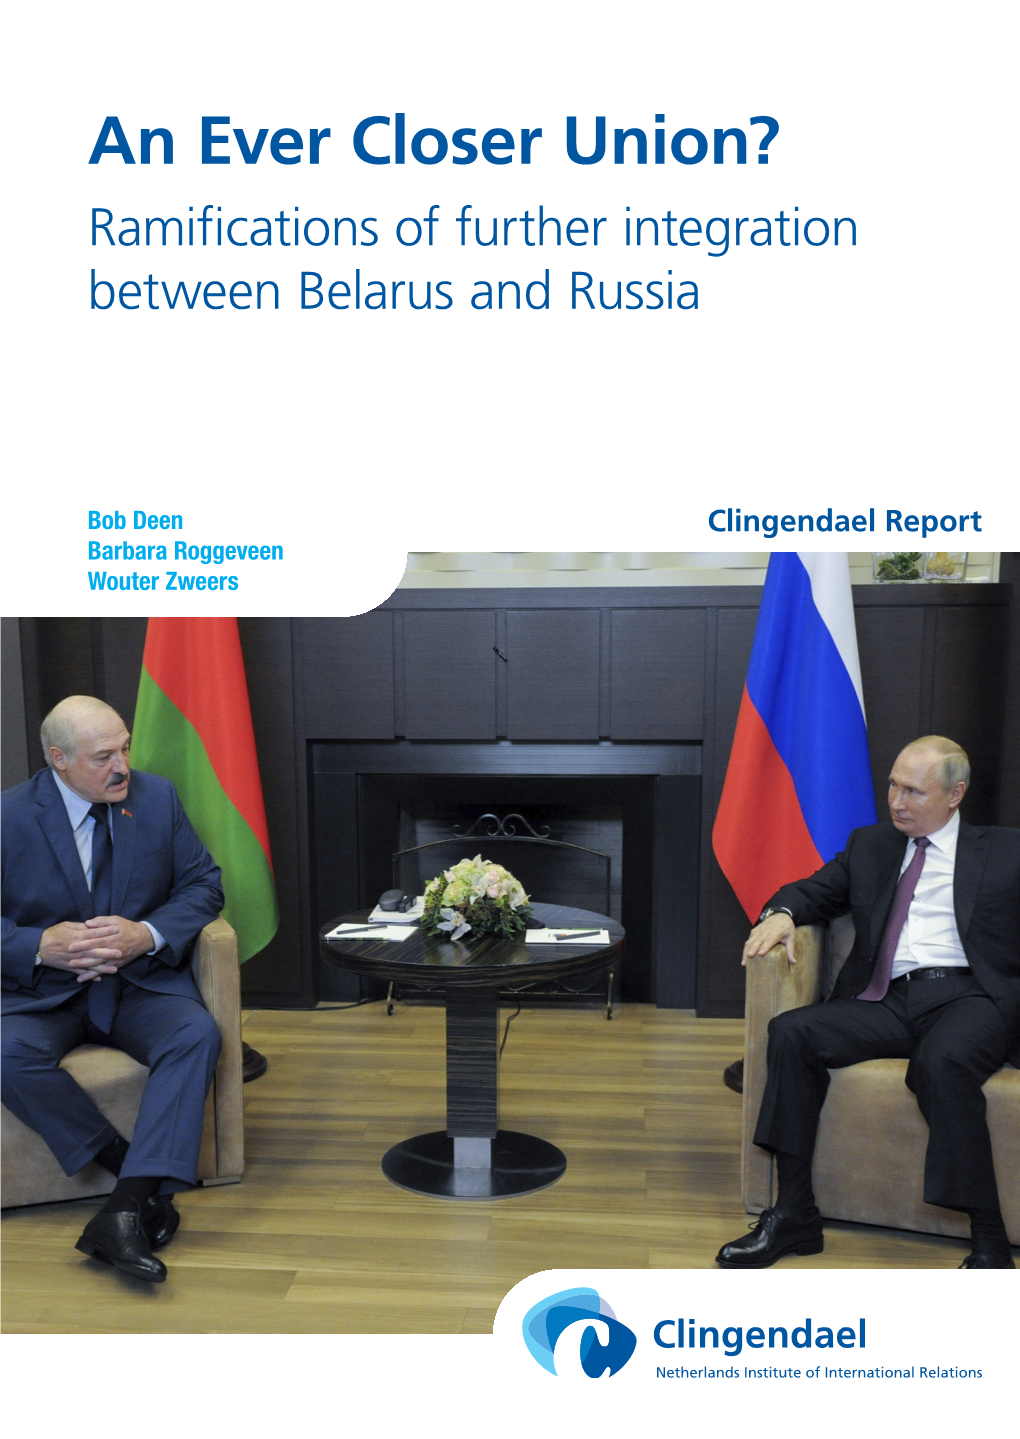 An Ever Closer Union? Ramifications of Further Integration Between Belarus and Russia